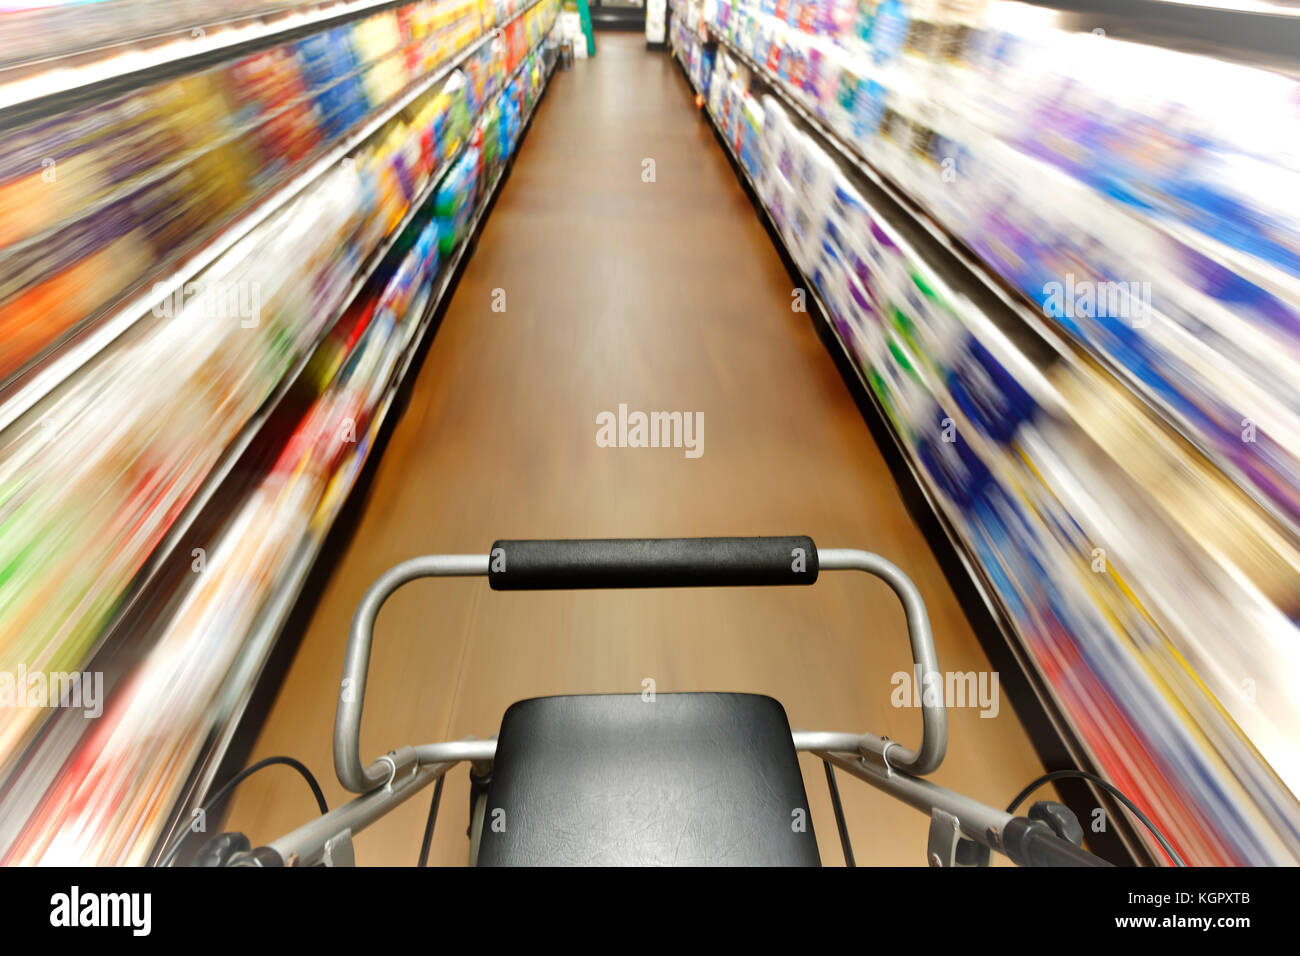 First person view of person with disability who is disoriented walking down a shopping aisle Stock Photo